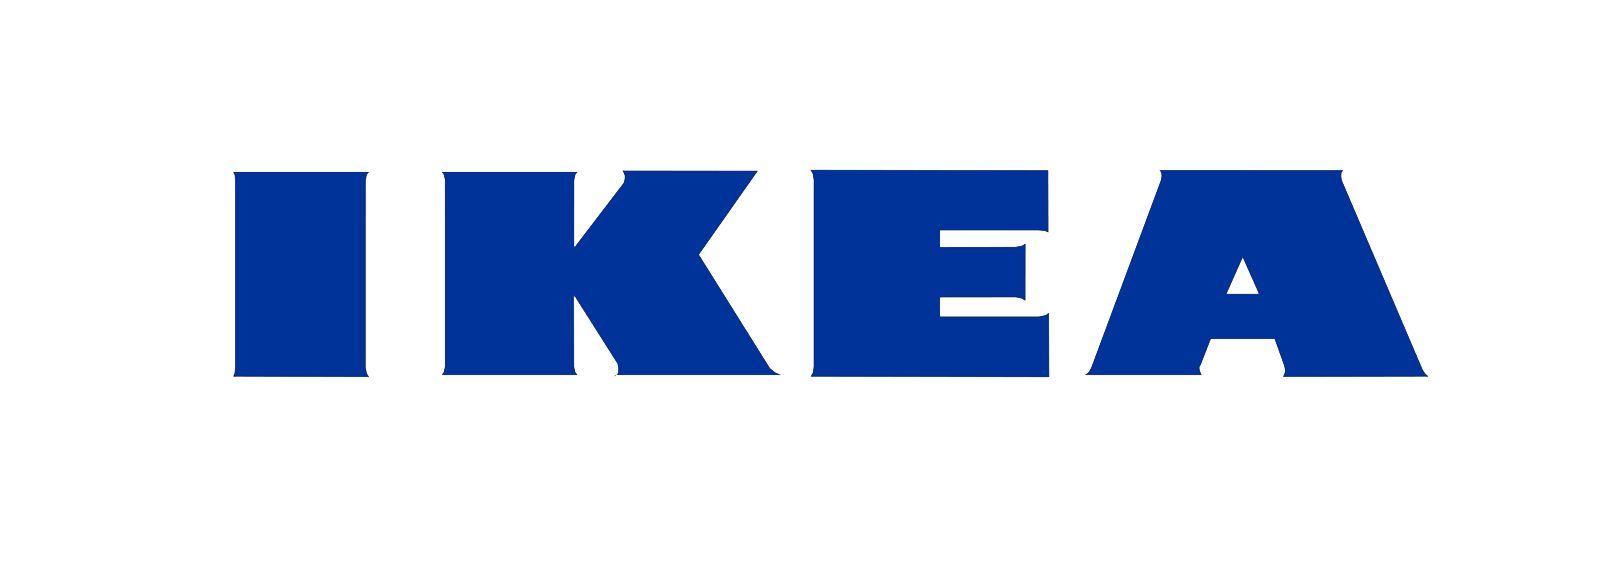 58 Ikea Logo Png Cliparts For